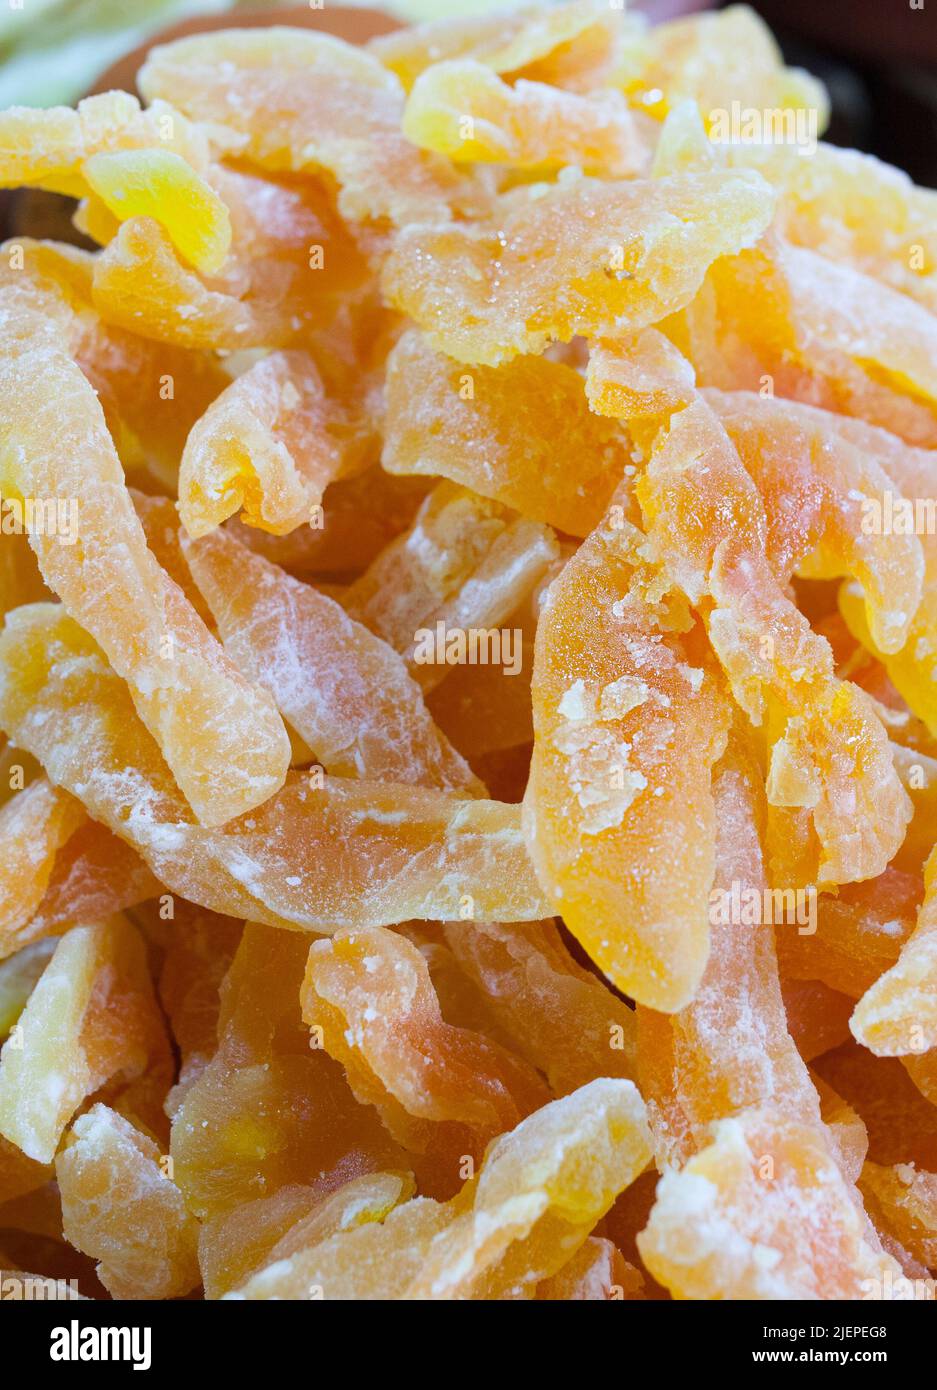 Bowl with dried melon fruit. Slices displayed at street market stall Stock Photo